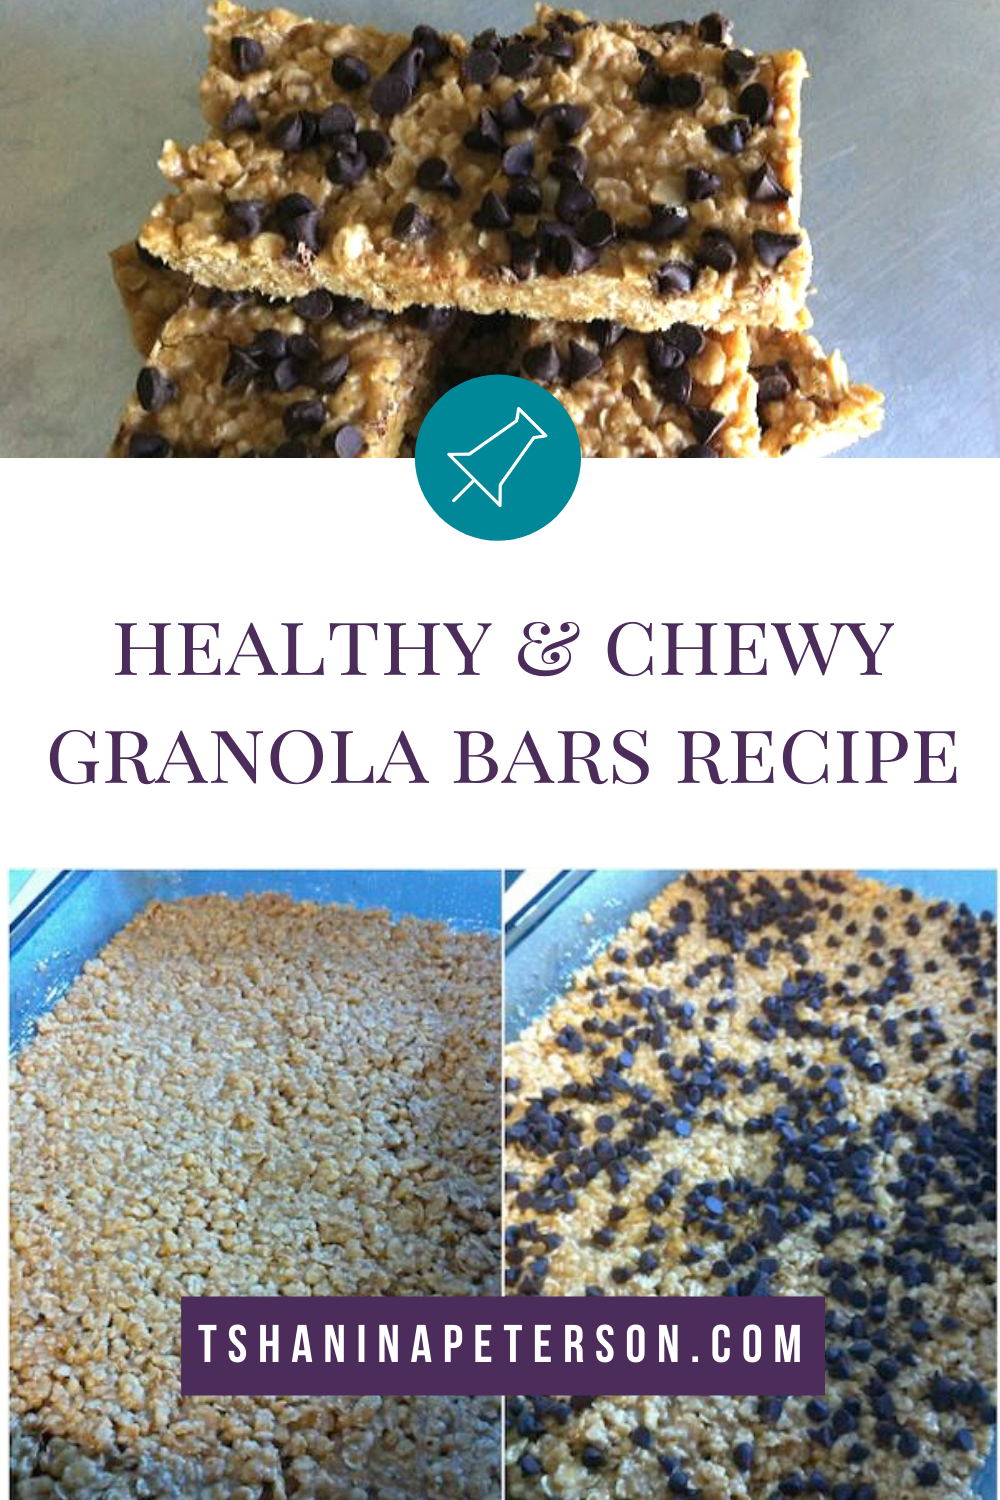 Are you looking for a healthy chewy granola bars recipe that your kids will love? These are simply the best (even better than store bought in my opinion) and my husband loves the crispy crunch from the cereal. Grab your oatmeal (either quick oats or old fashioned will work), honey, coconut oil, peanut butter, rice krispies and chocolate chips and let me show you how to make this super easy no bake recipe!